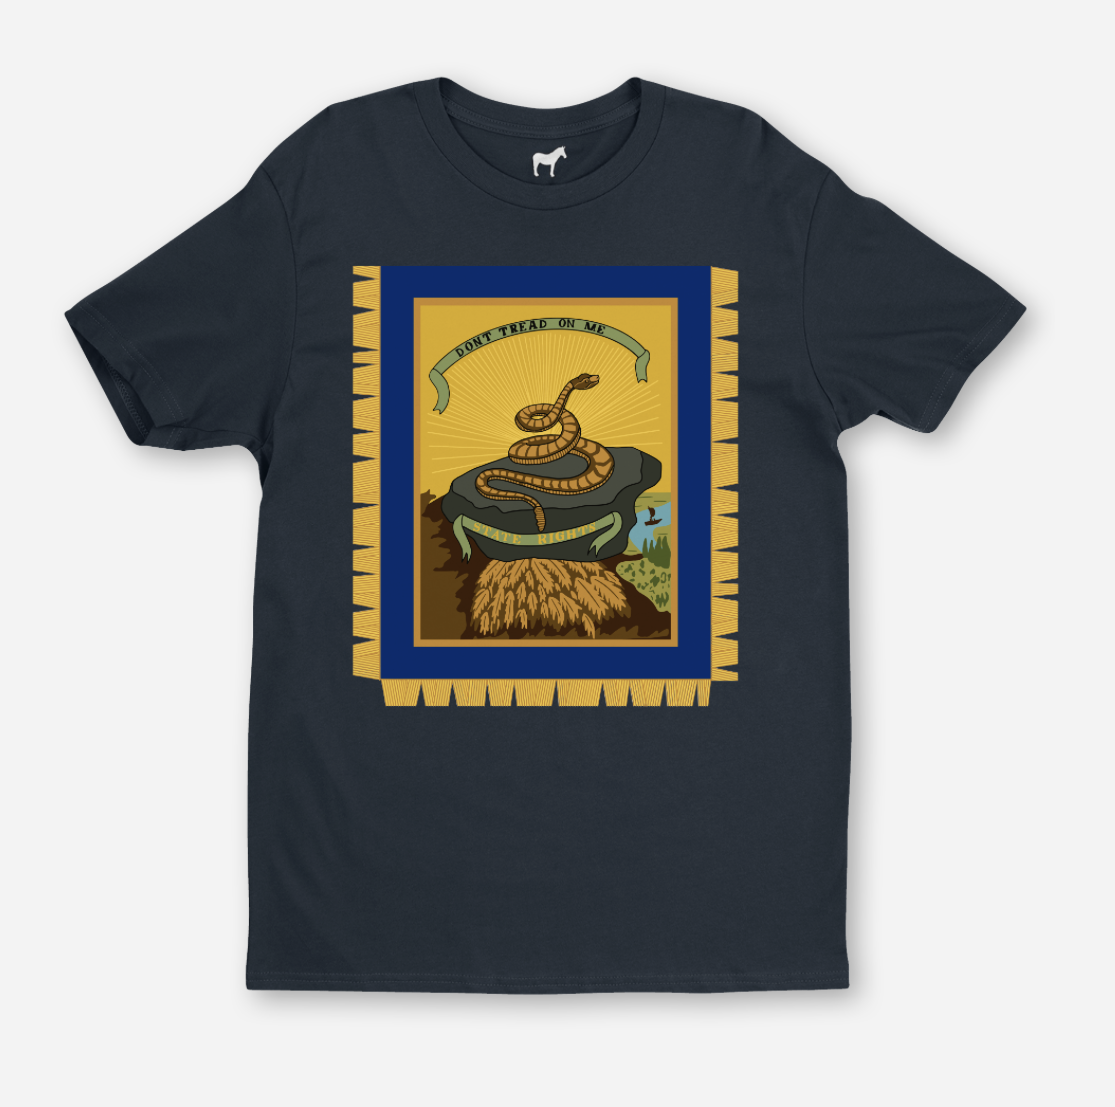 "State Rights - Don't Tread on Me" Georgia Secession Flag (full design) Shirt